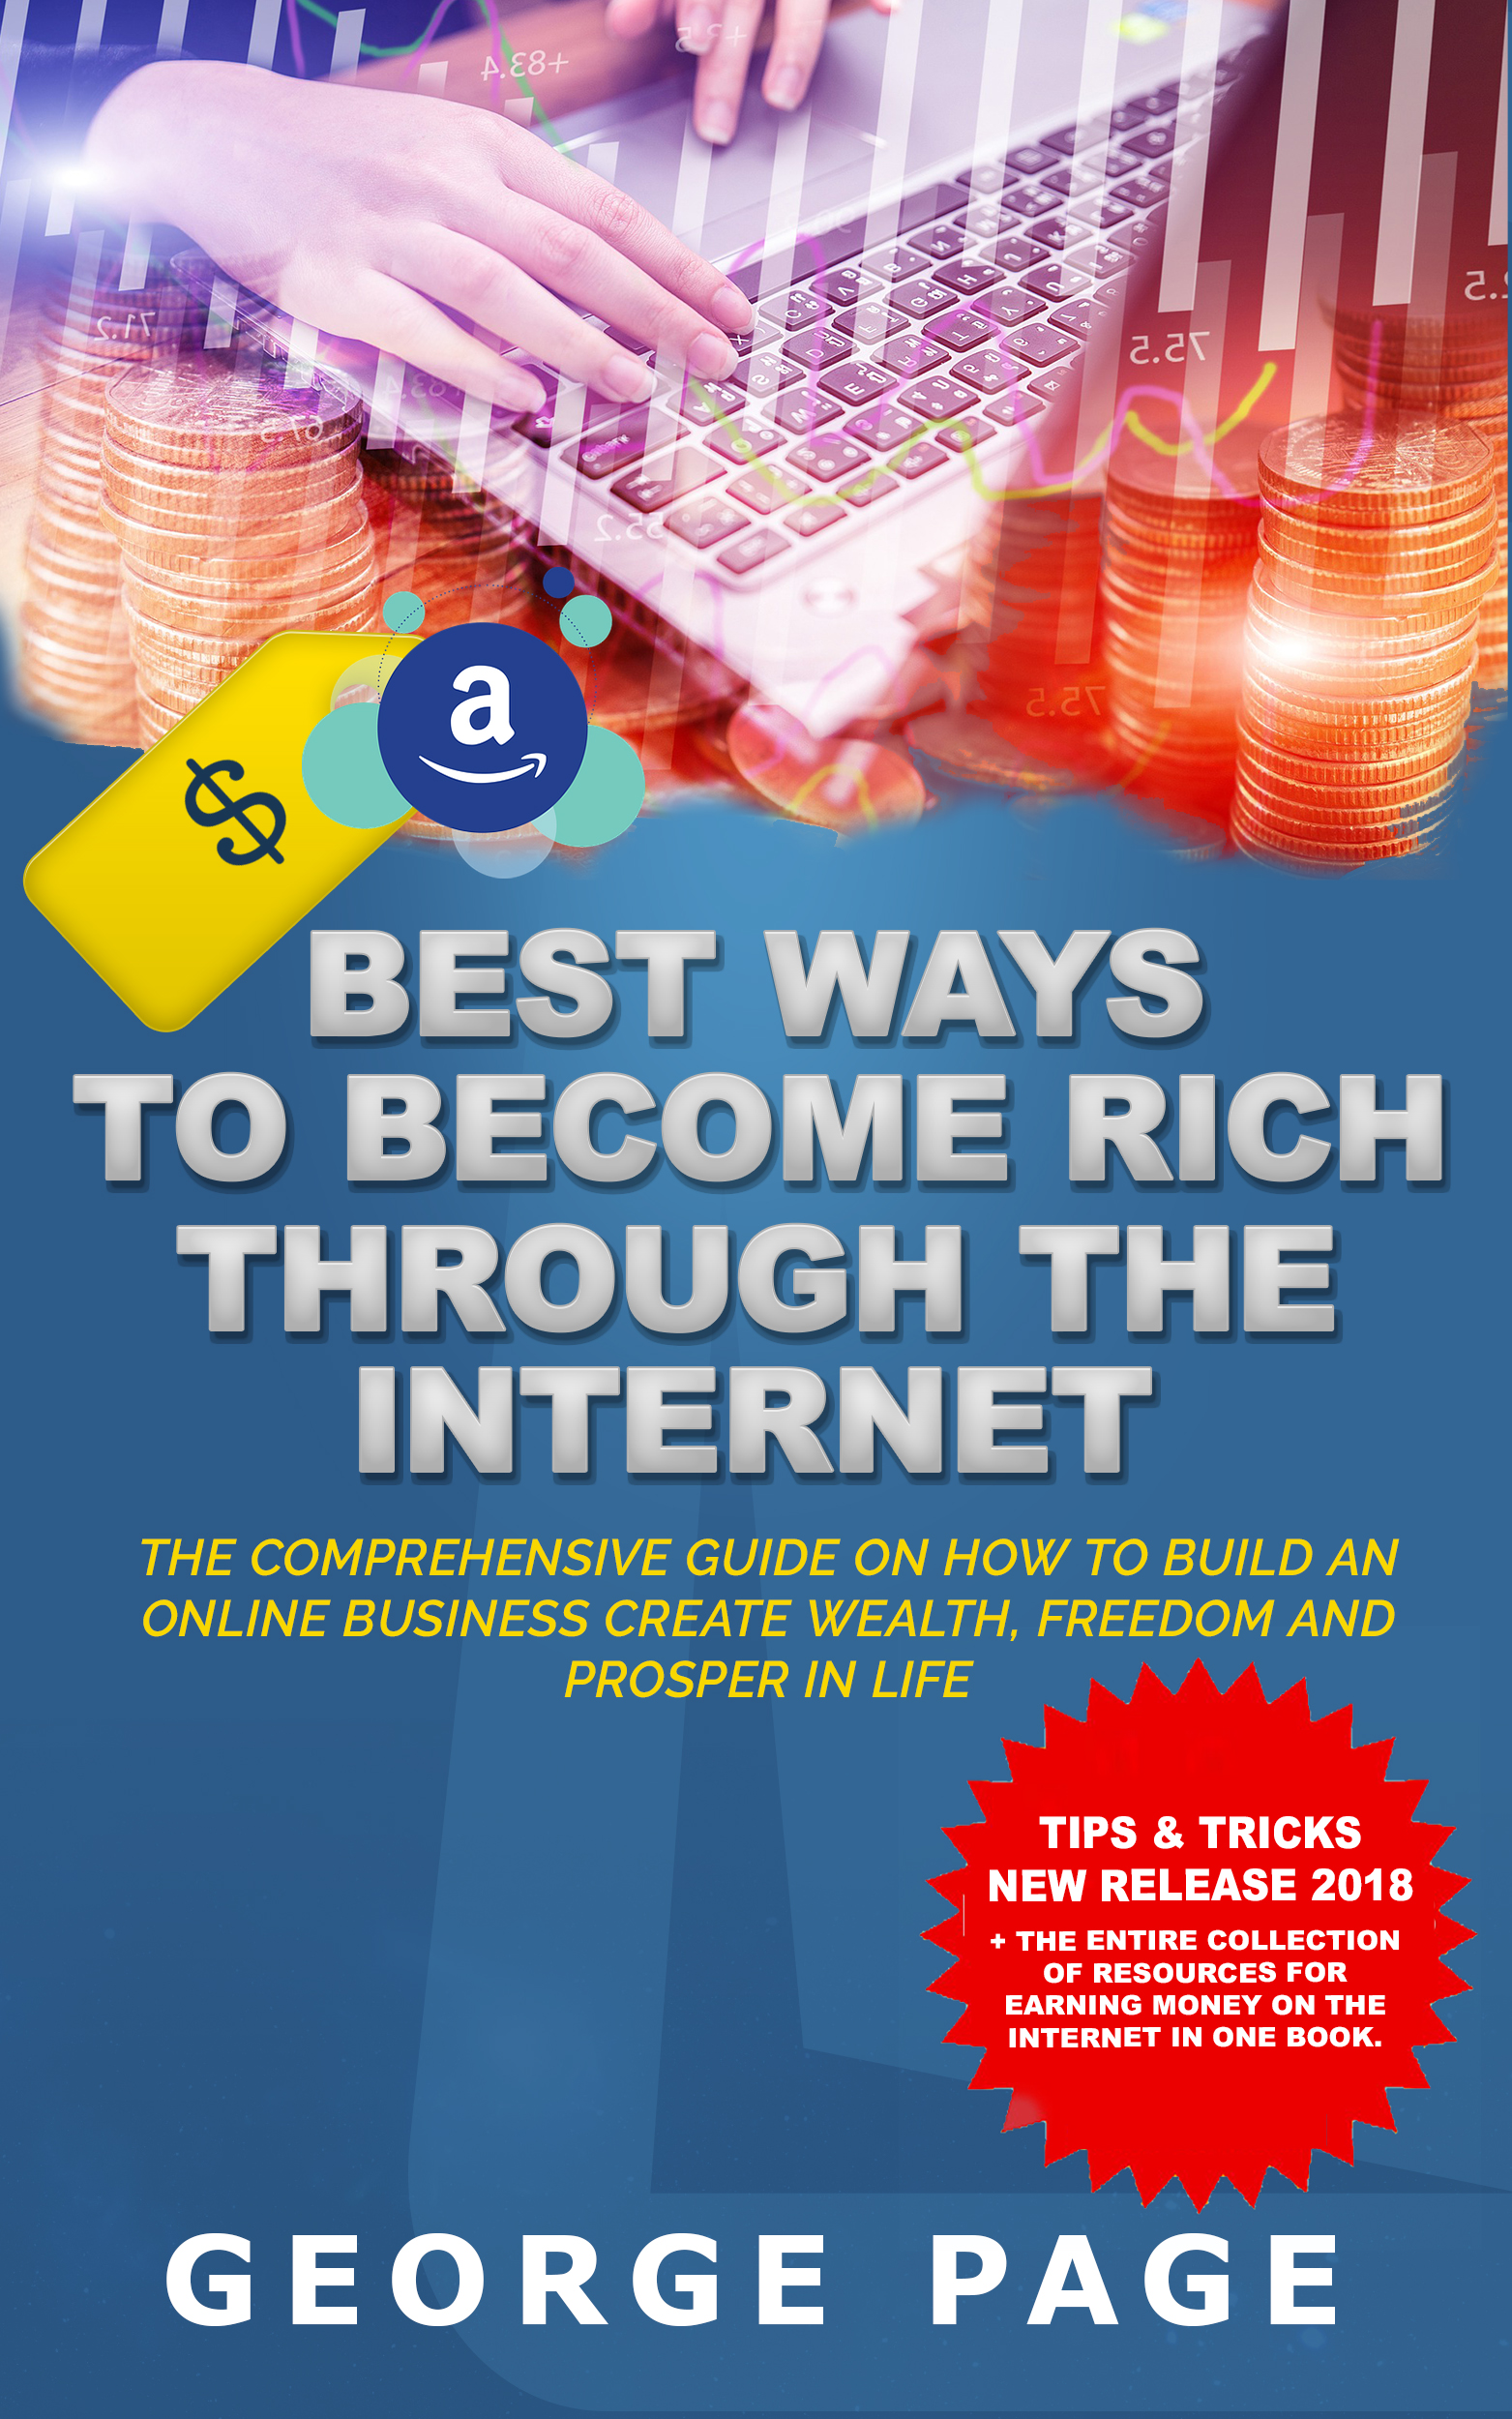 FREE: BEST WAYS TO BECOME RICH THROUGH THE INTERNET: THE COMPREHENSIVE GUIDE ON HOW TO BUILD AN ONLINE BUSINESS CREATE WEALTH, FREEDOM AND PROSPER IN LIFE by George Page